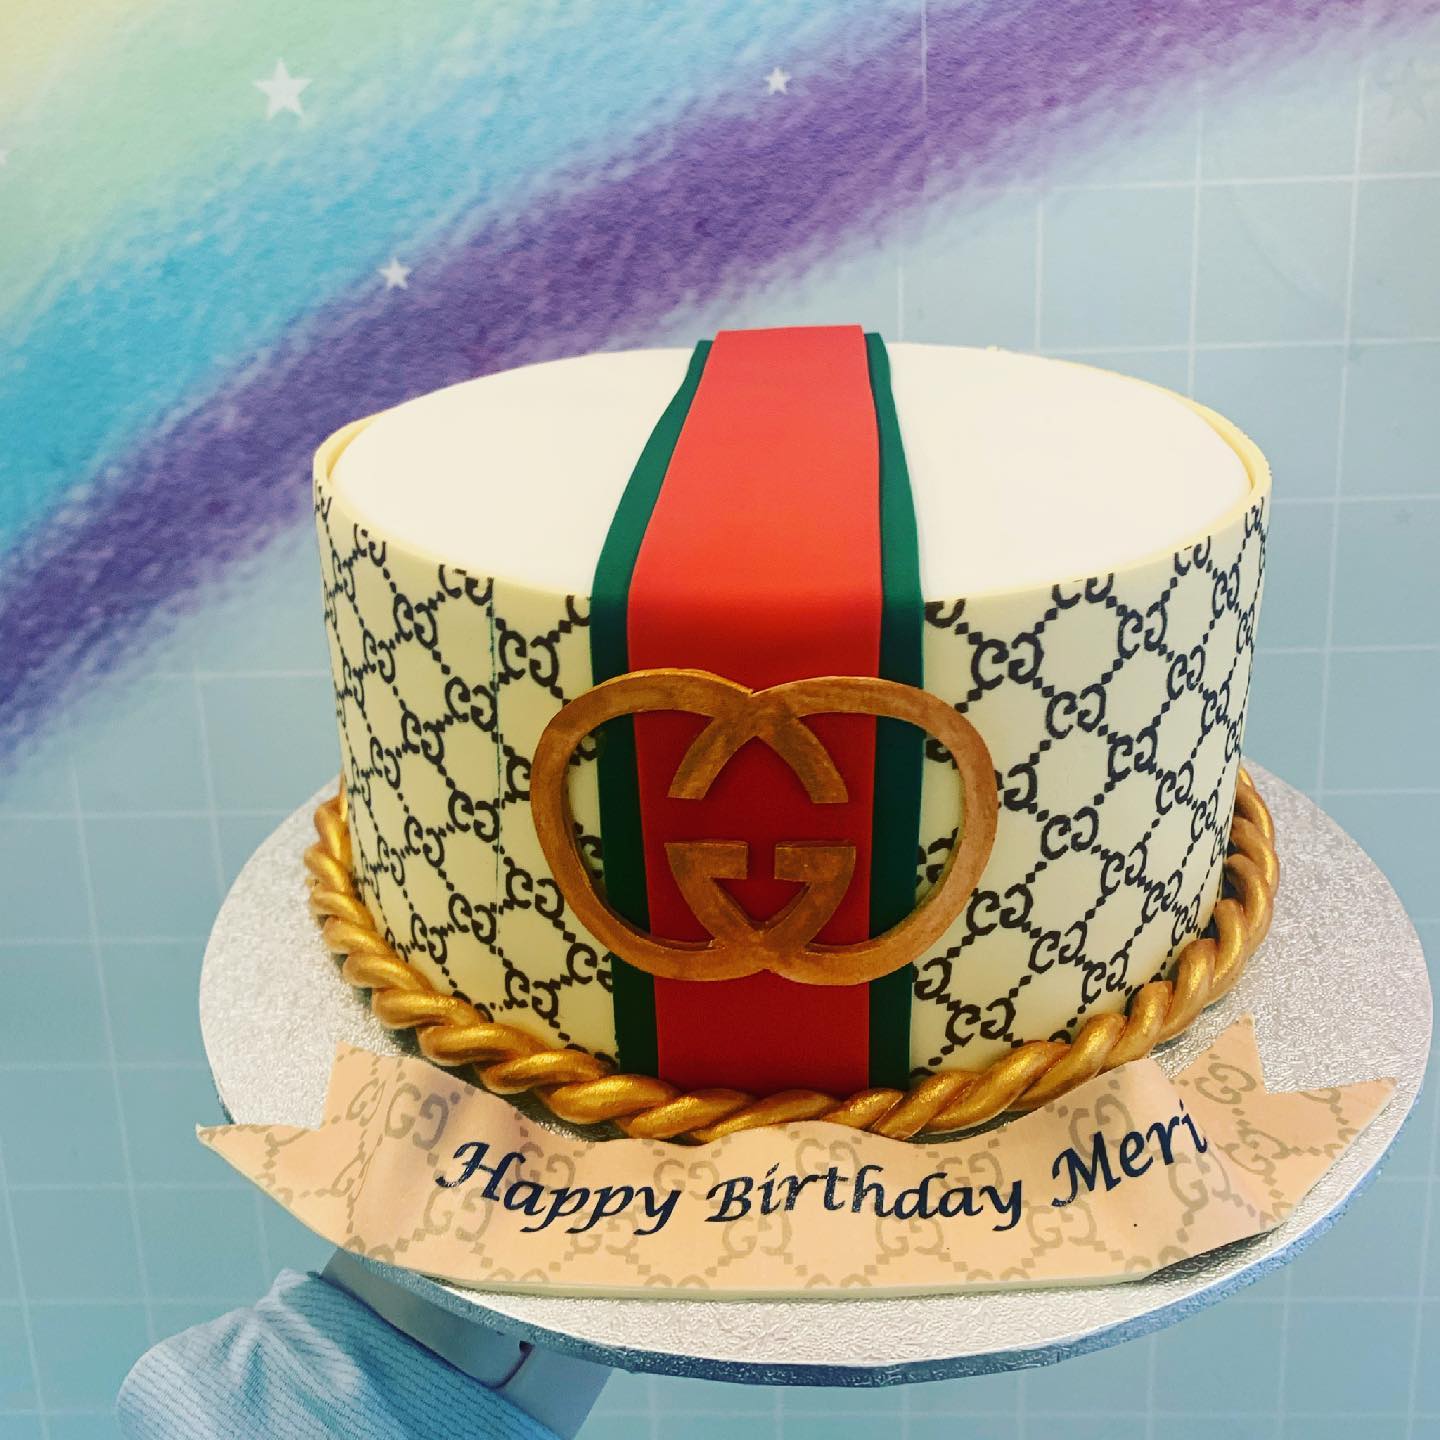 Gucci beauty! Perfect cake for the boujee guy in your life!! #guccicake  #guycakes #boujeecakes #socalbakery #inlandempirebakery… | Instagram